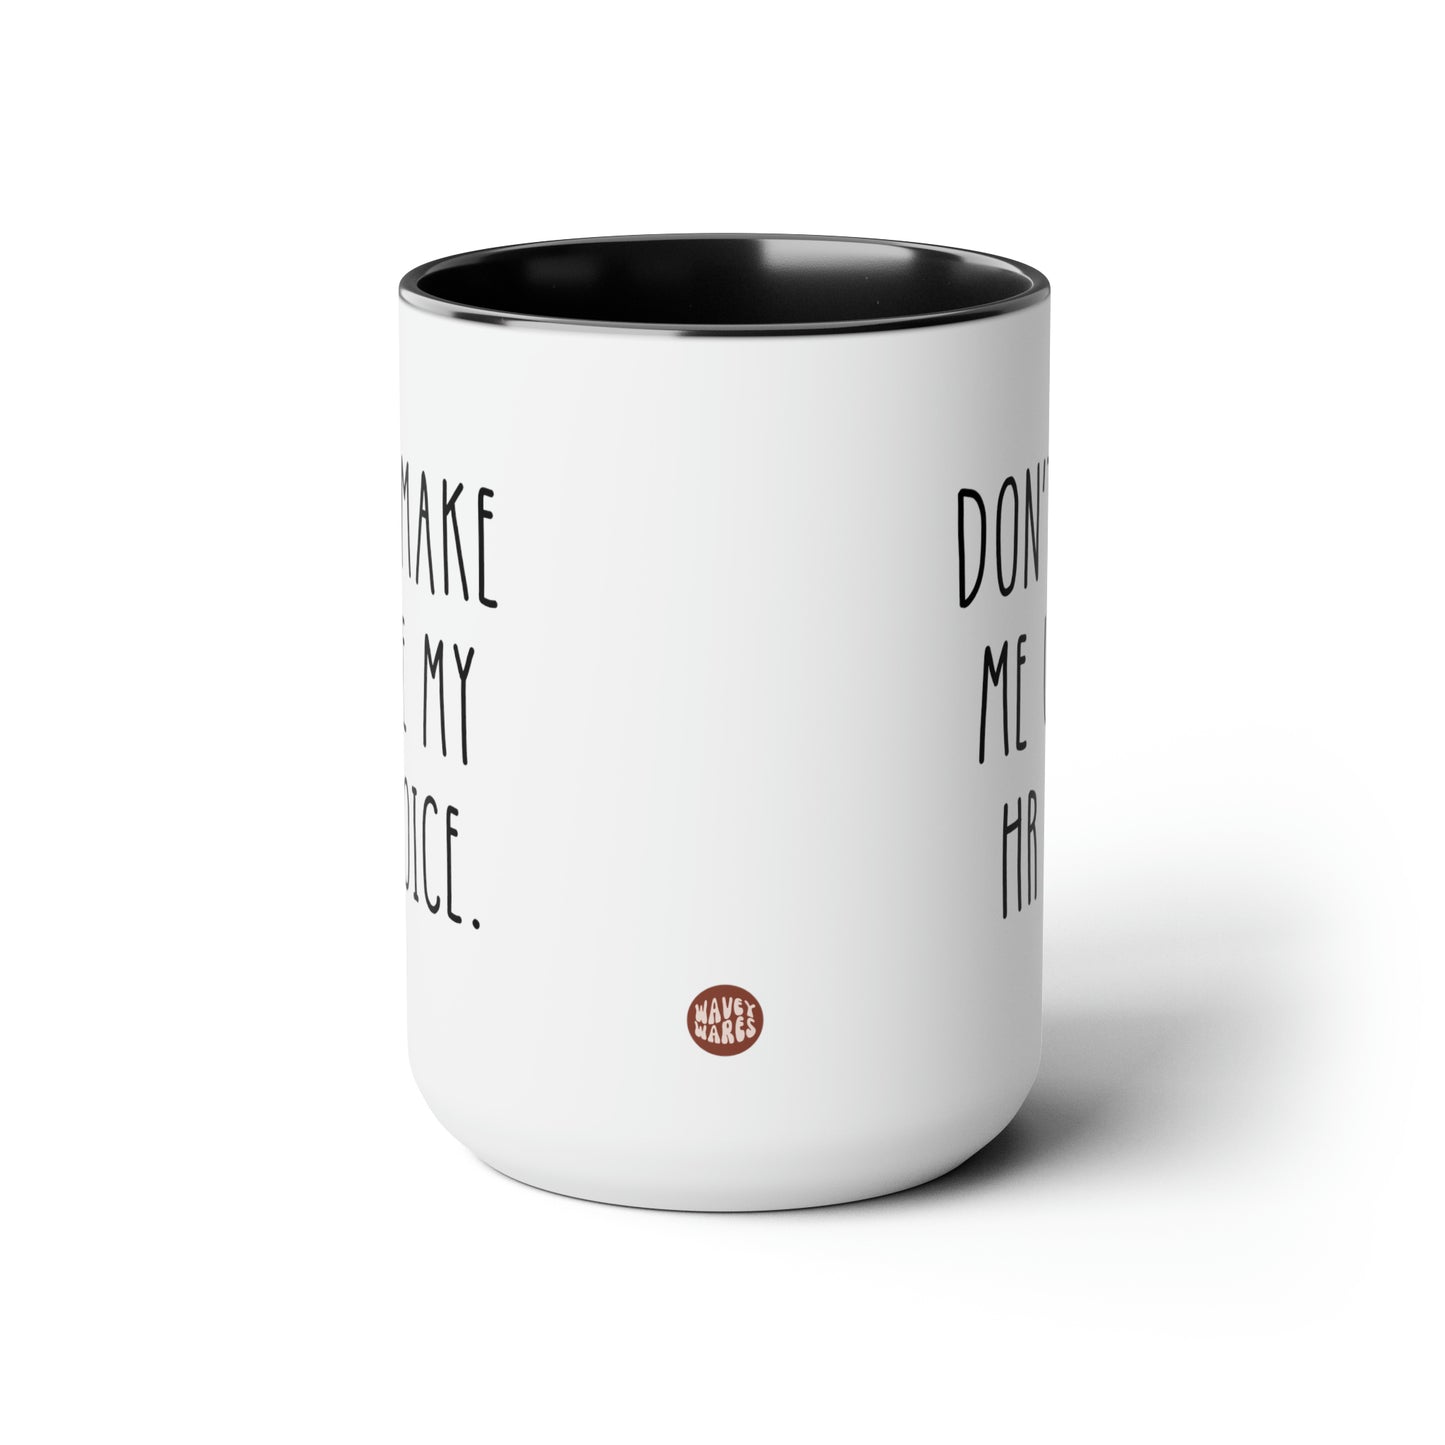 Don't Make Me Use My HR Voice 15oz white with black accent funny large coffee mug gift for human resources coworker signs decor quotes waveywares wavey wares wavywares wavy wares side